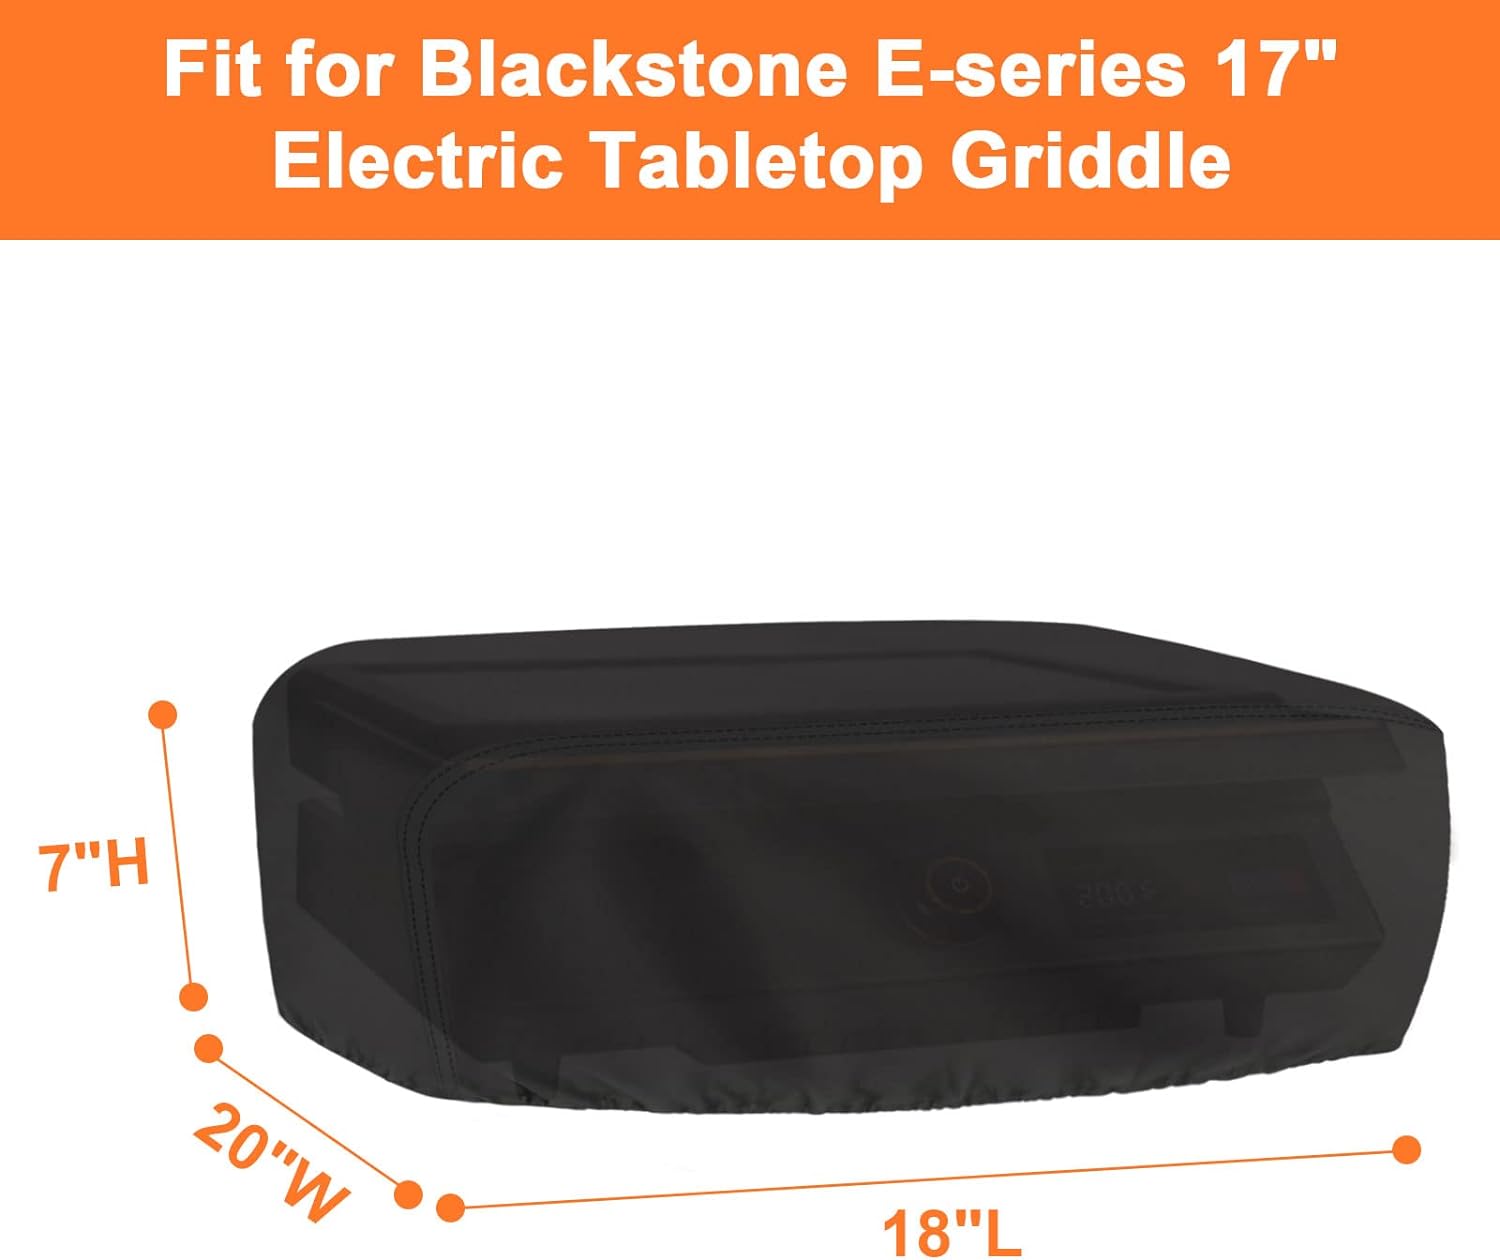 Blackstone E-Series 17 Electric Tabletop Griddle with Hood NEW